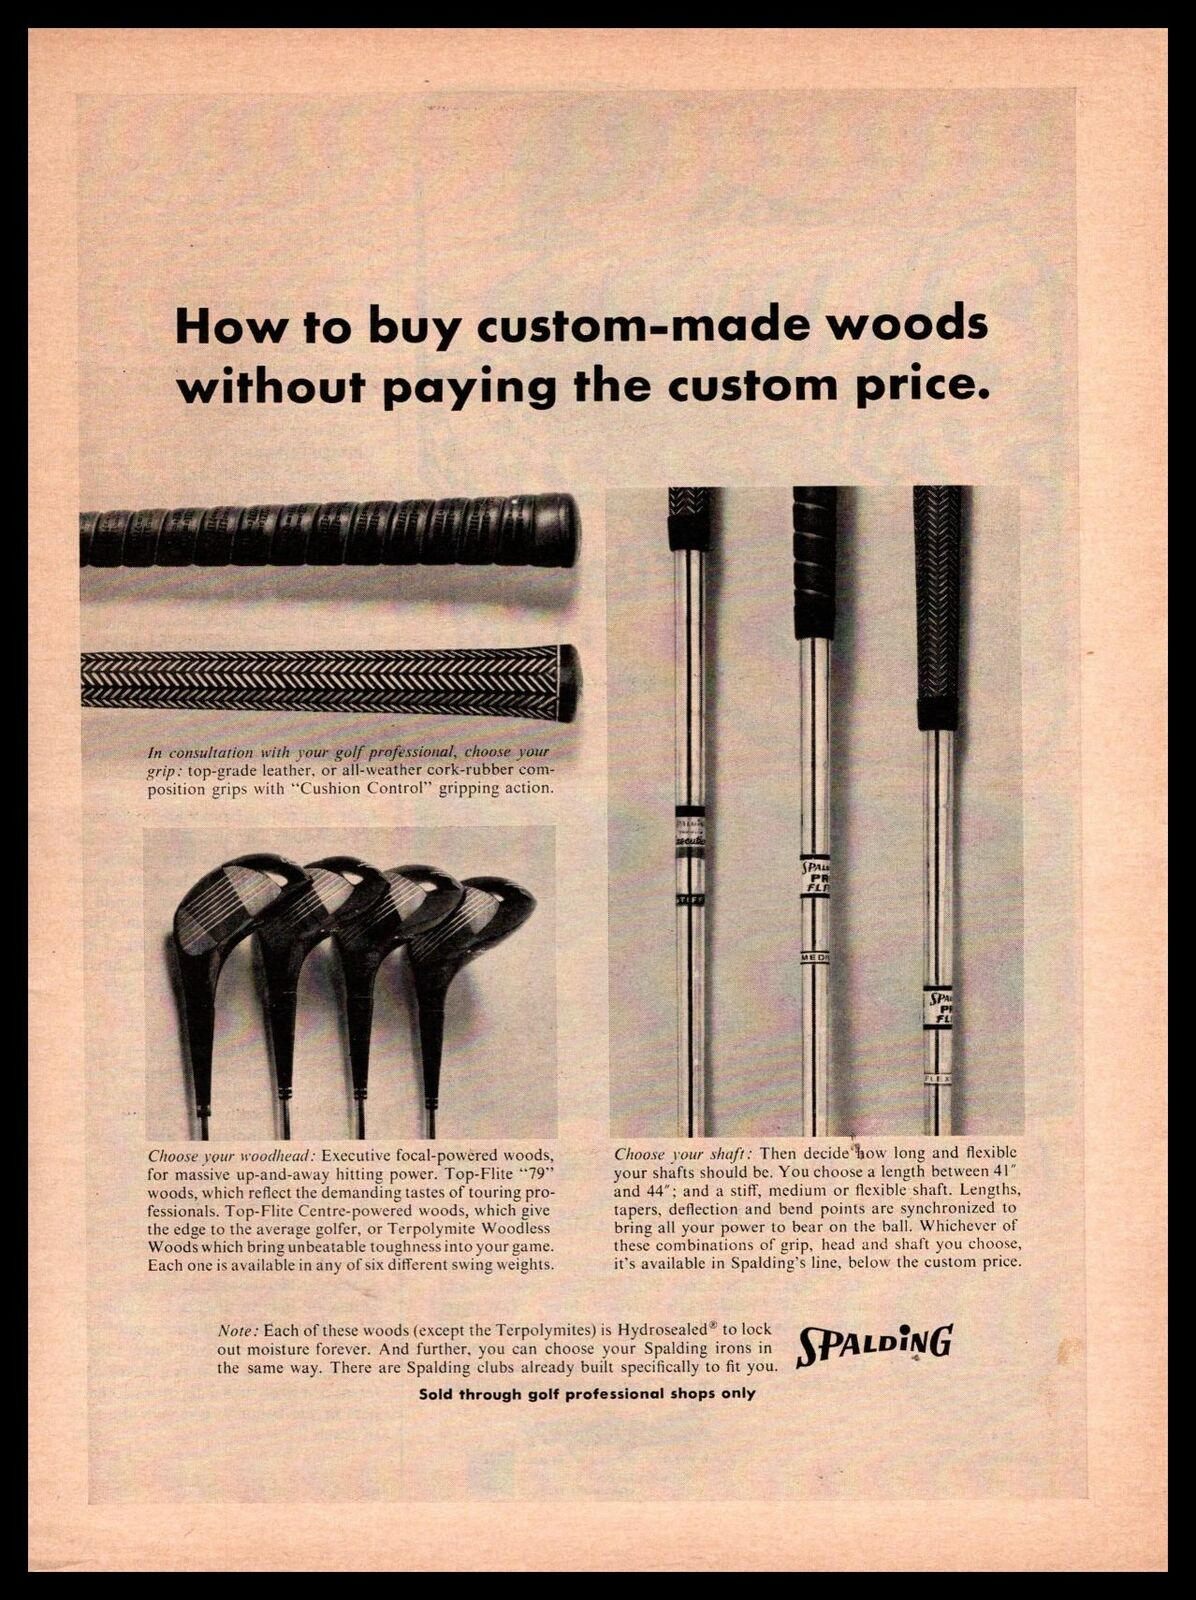 1964 Spalding Top-flight "79" Centre-powered Woods Golf Clubs Vintage Print Ad